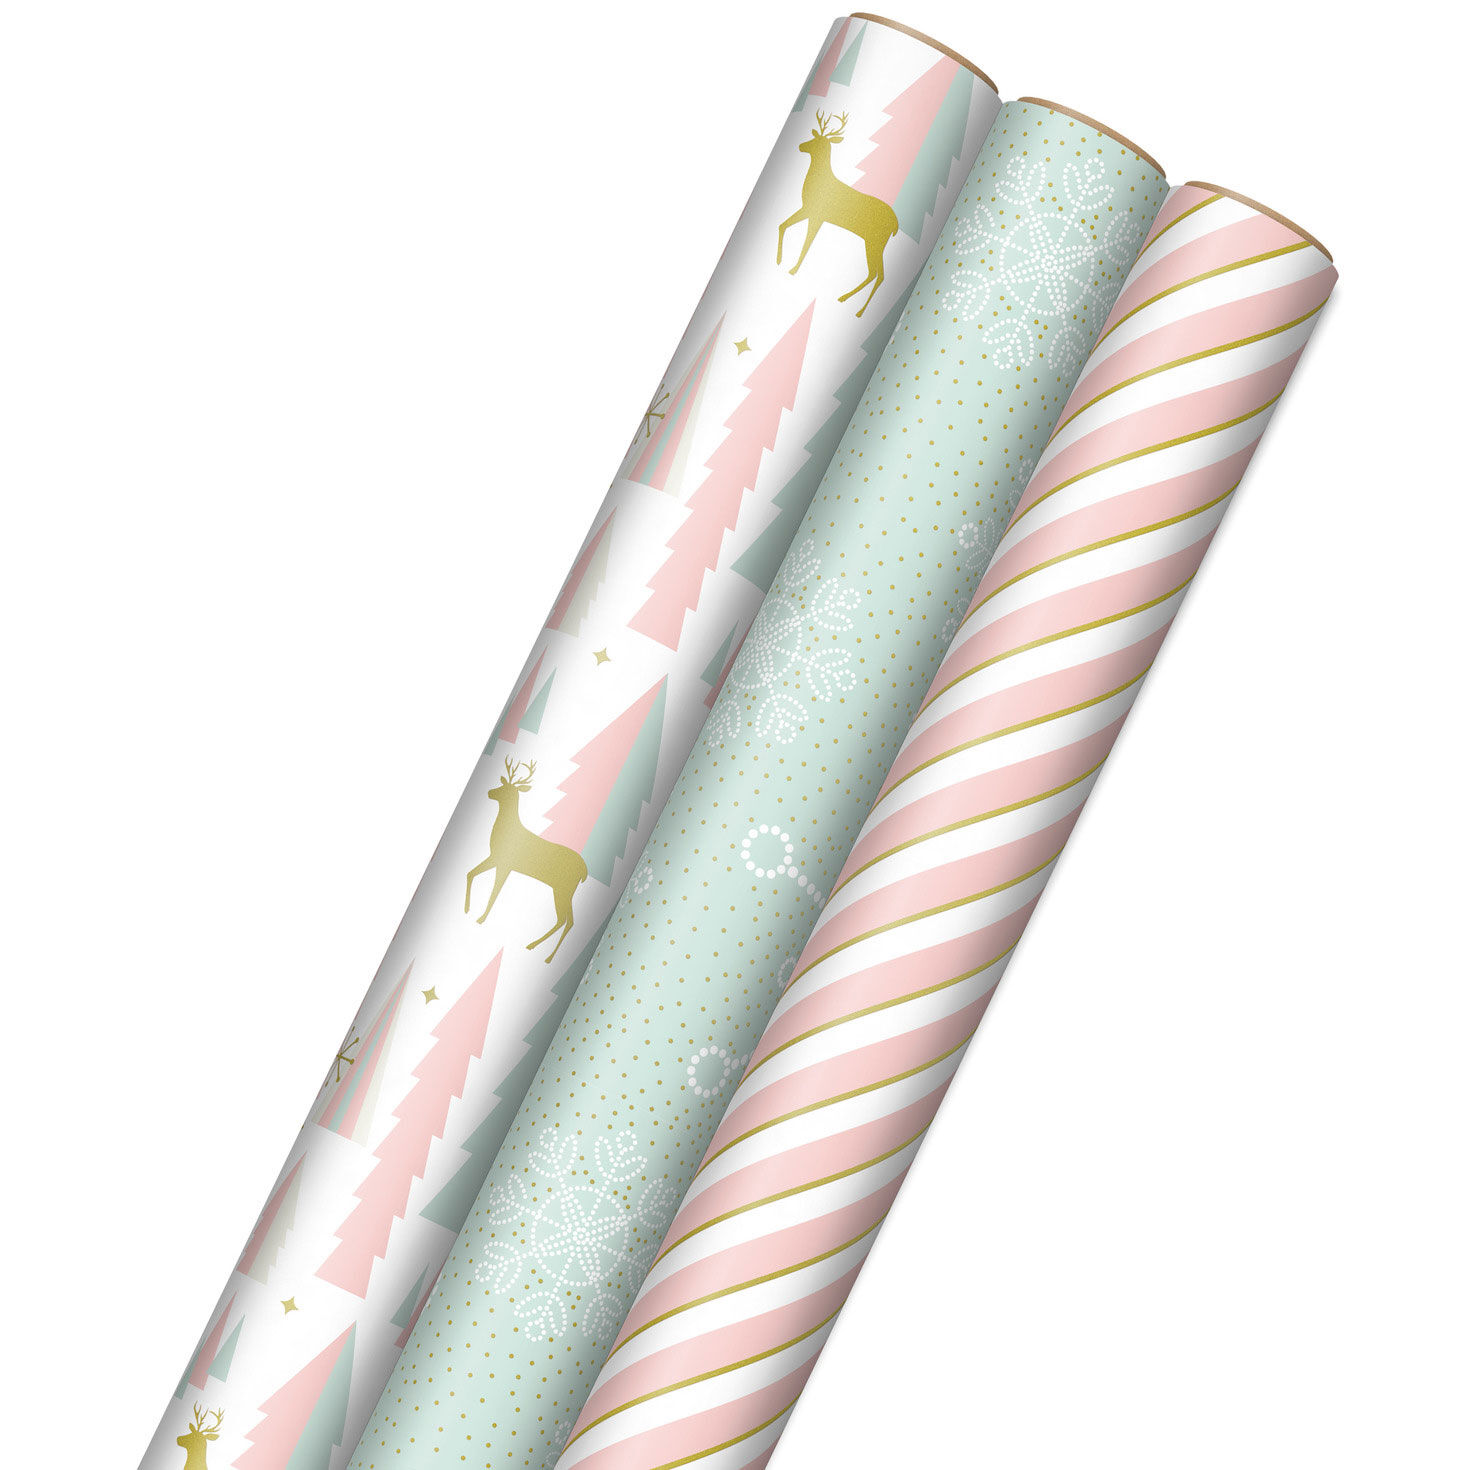 https://www.hallmark.com/dw/image/v2/AALB_PRD/on/demandware.static/-/Sites-hallmark-master/default/dw3ed92a9b/images/finished-goods/products/5JXW1083/Pink-and-Mint-Christmas-Wrapping-Paper-Assortment_5JXW1083_01.jpg?sfrm=jpg